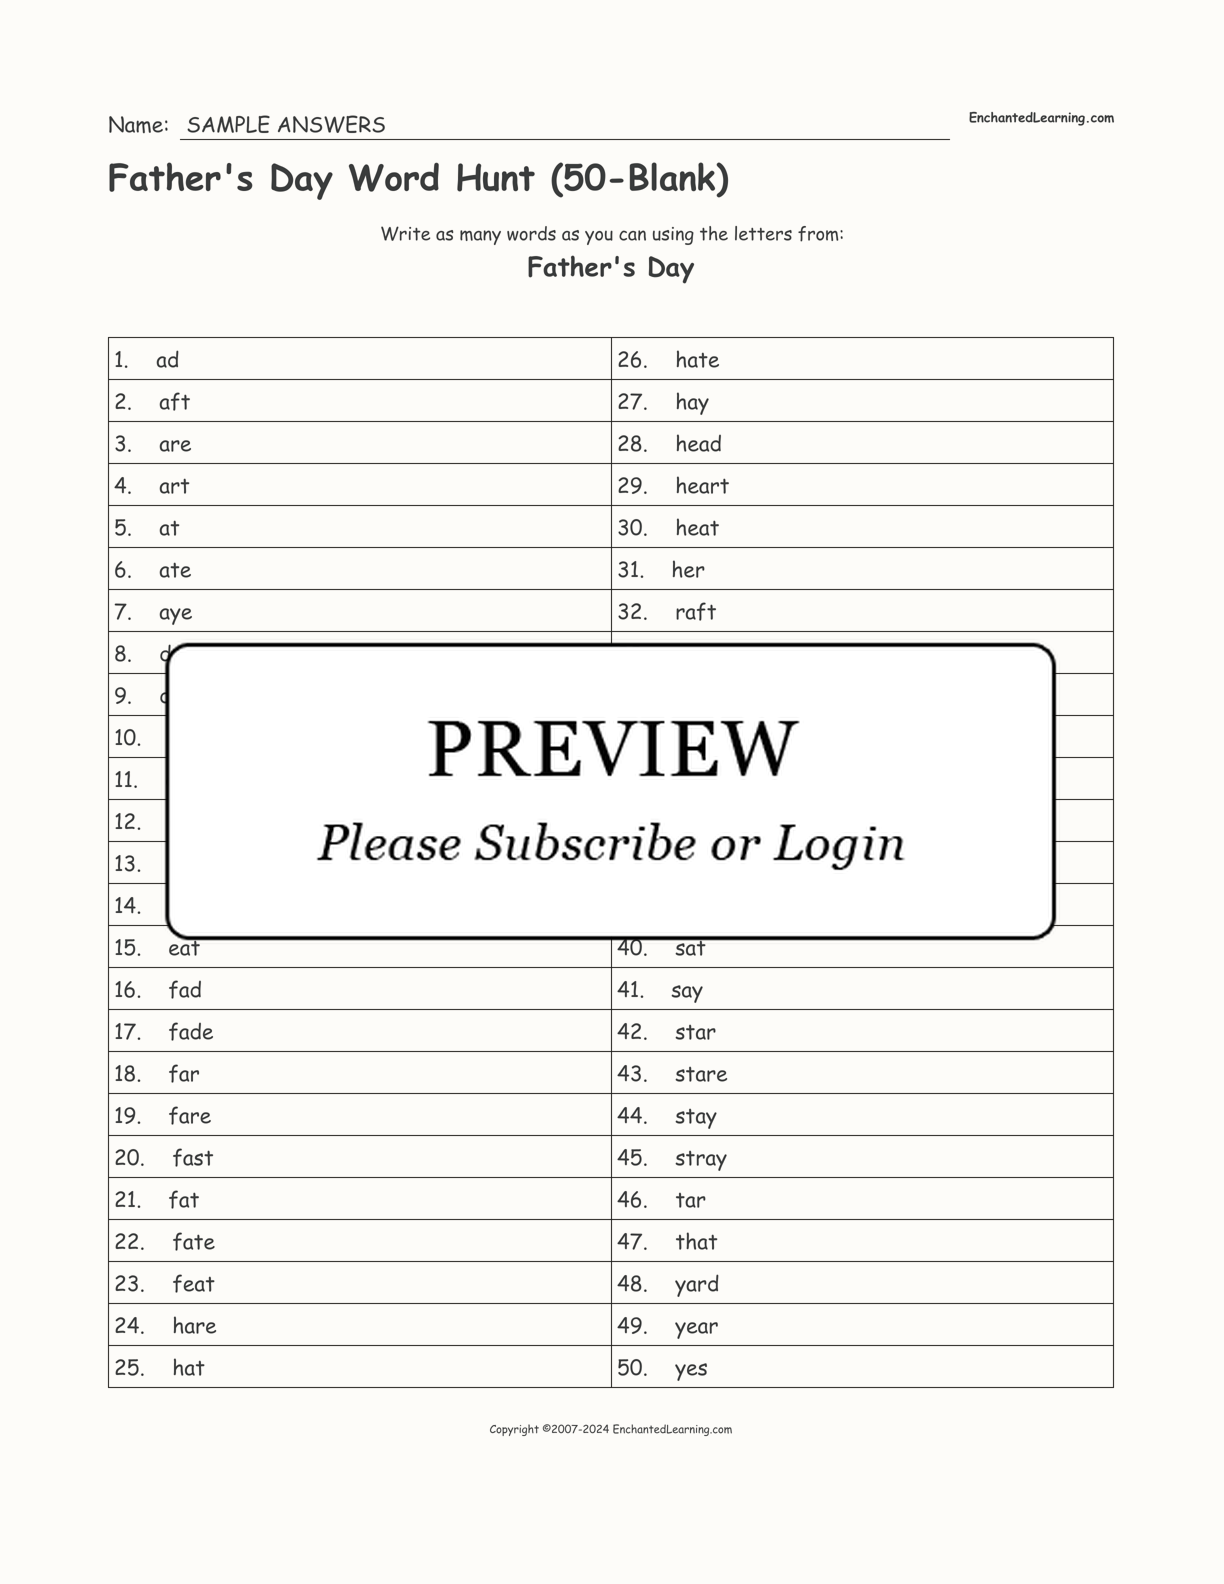 Father's Day Word Hunt (50-Blank) interactive worksheet page 2